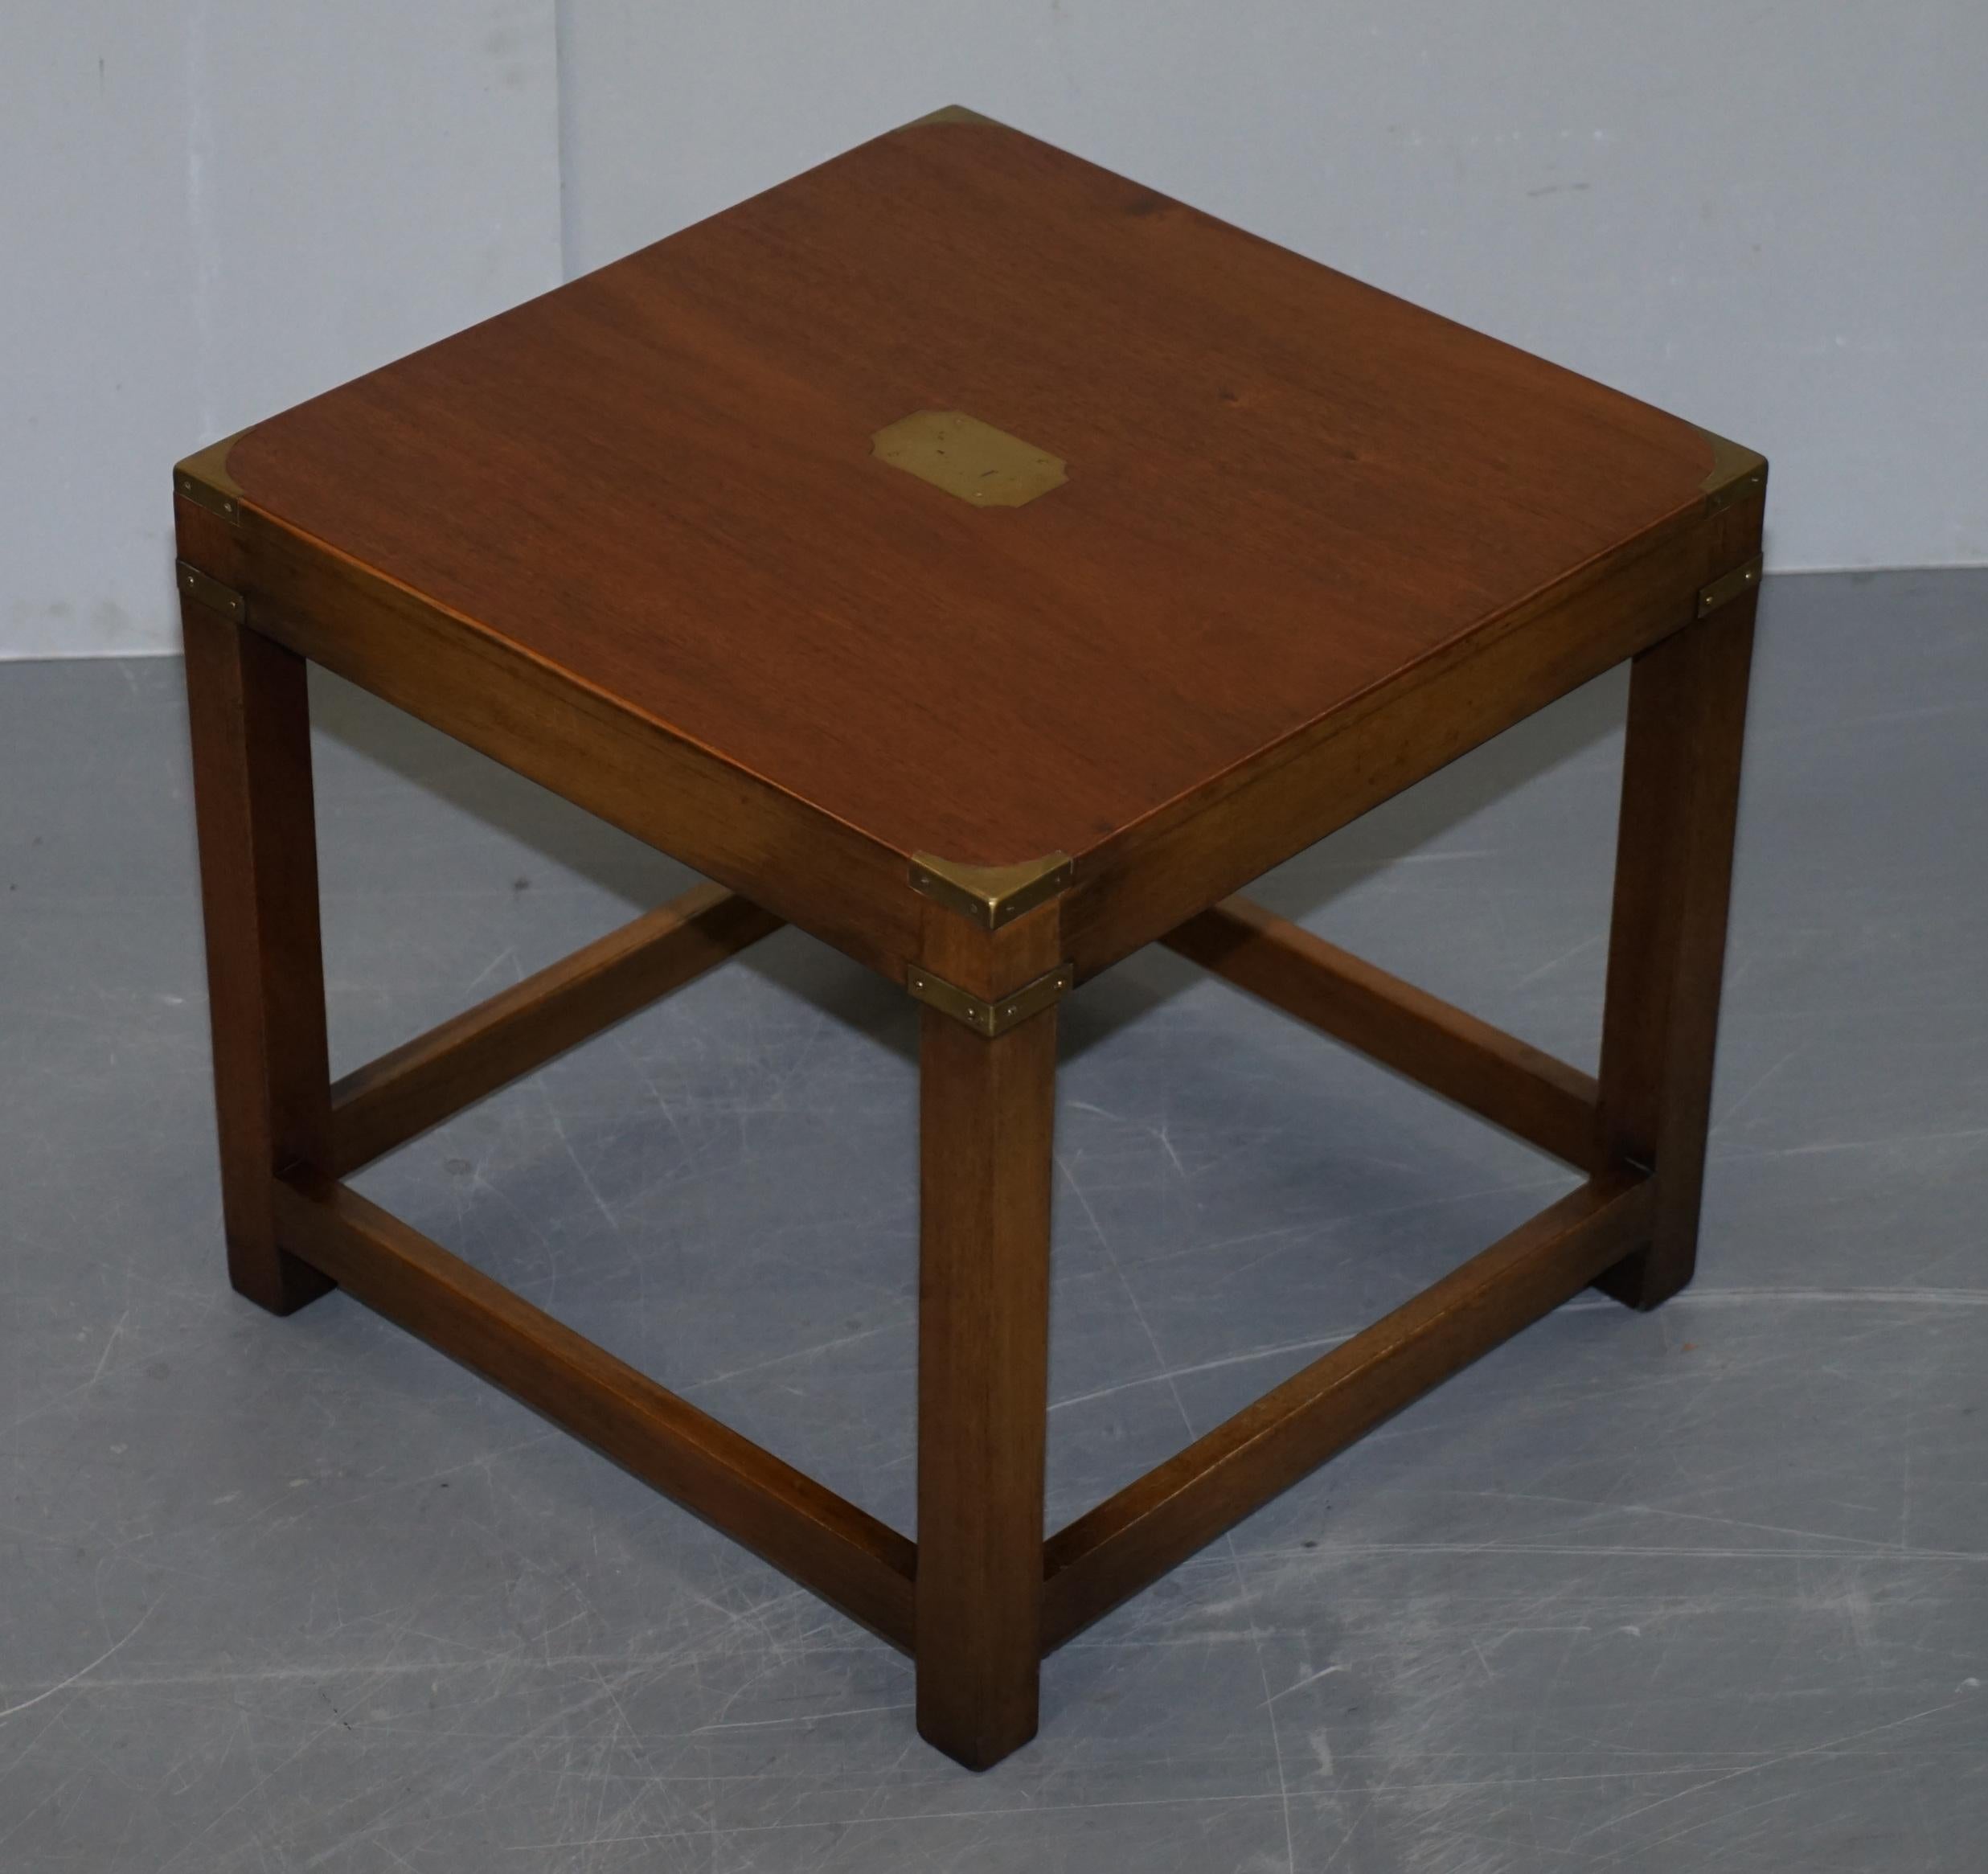 We are delighted to offer for sale this stunning pair of fully restored Kennedy furniture Harrods London Military Campaign side tables

A good looking and well made pair, these are absolutely iconic and highly collectable

This pair have been